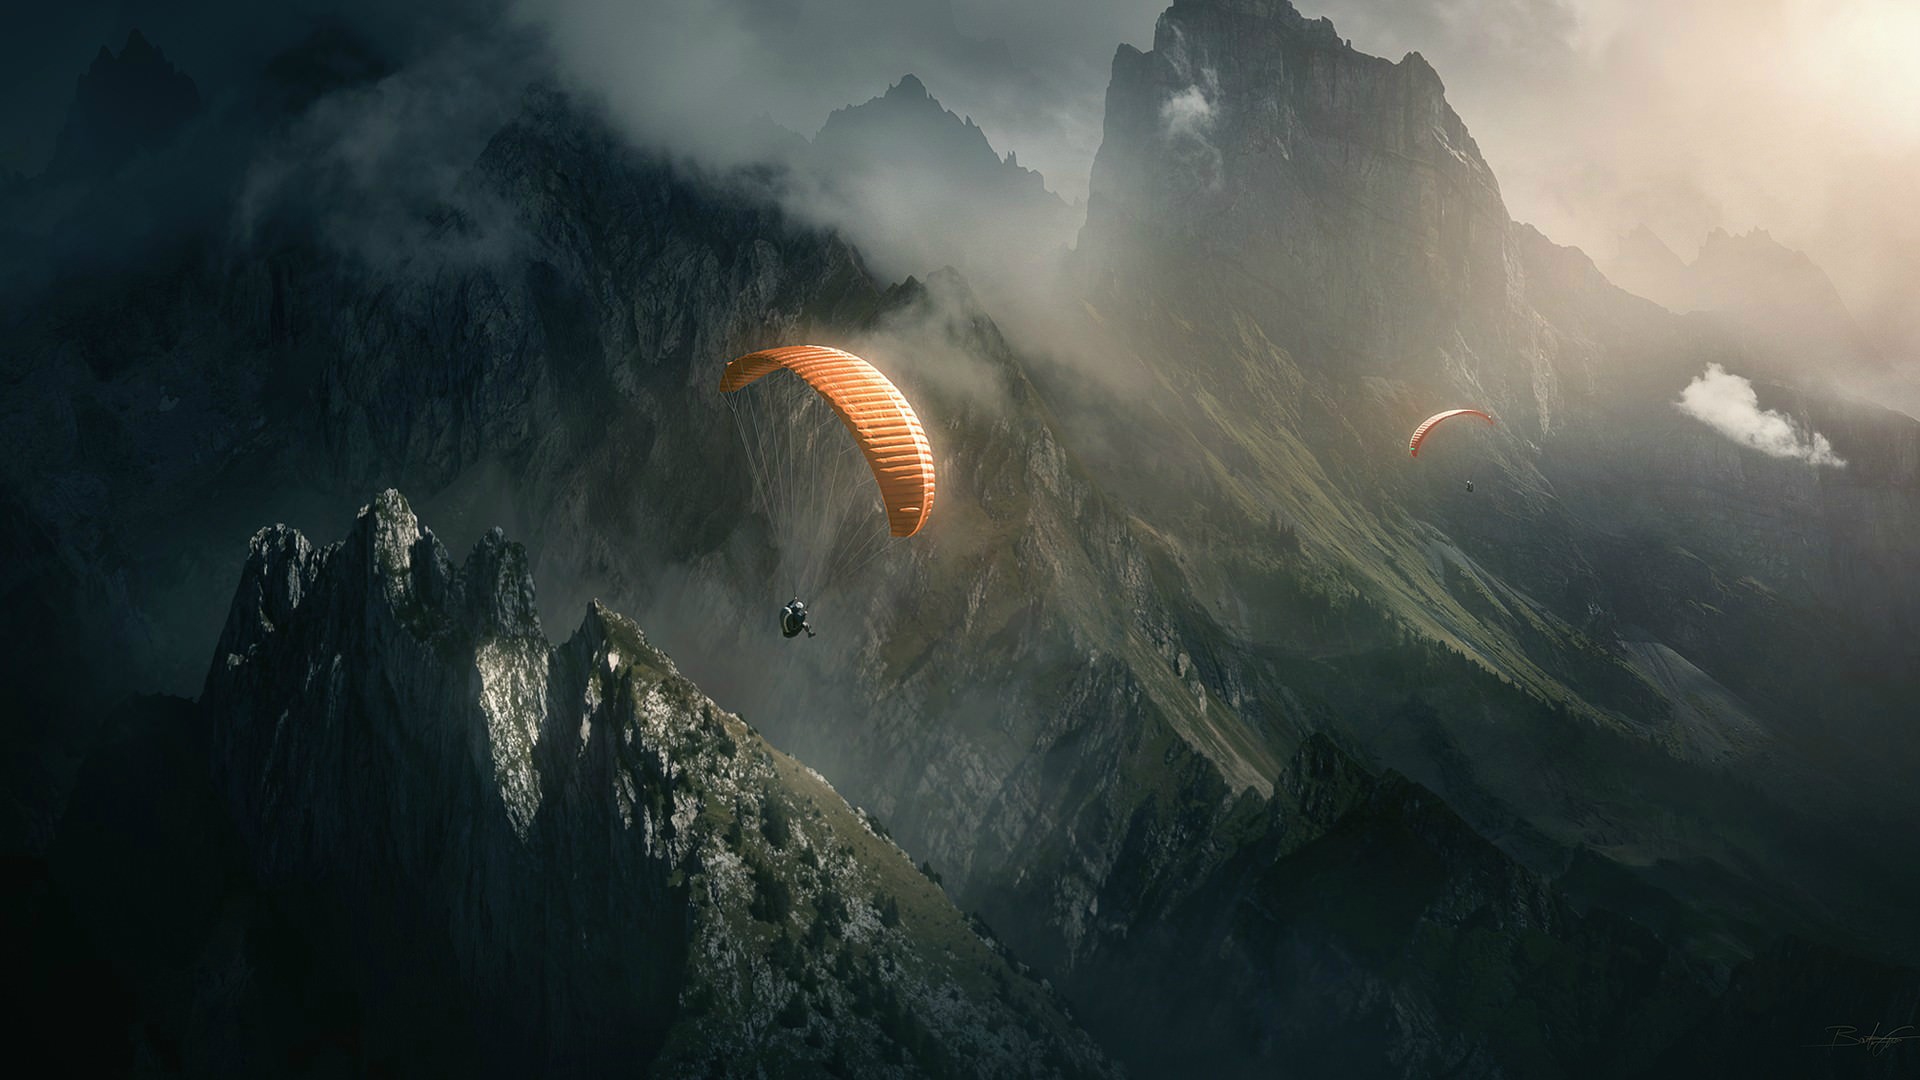 General 1920x1080 mountains paragliding digital art outdoors aerial view landscape nature